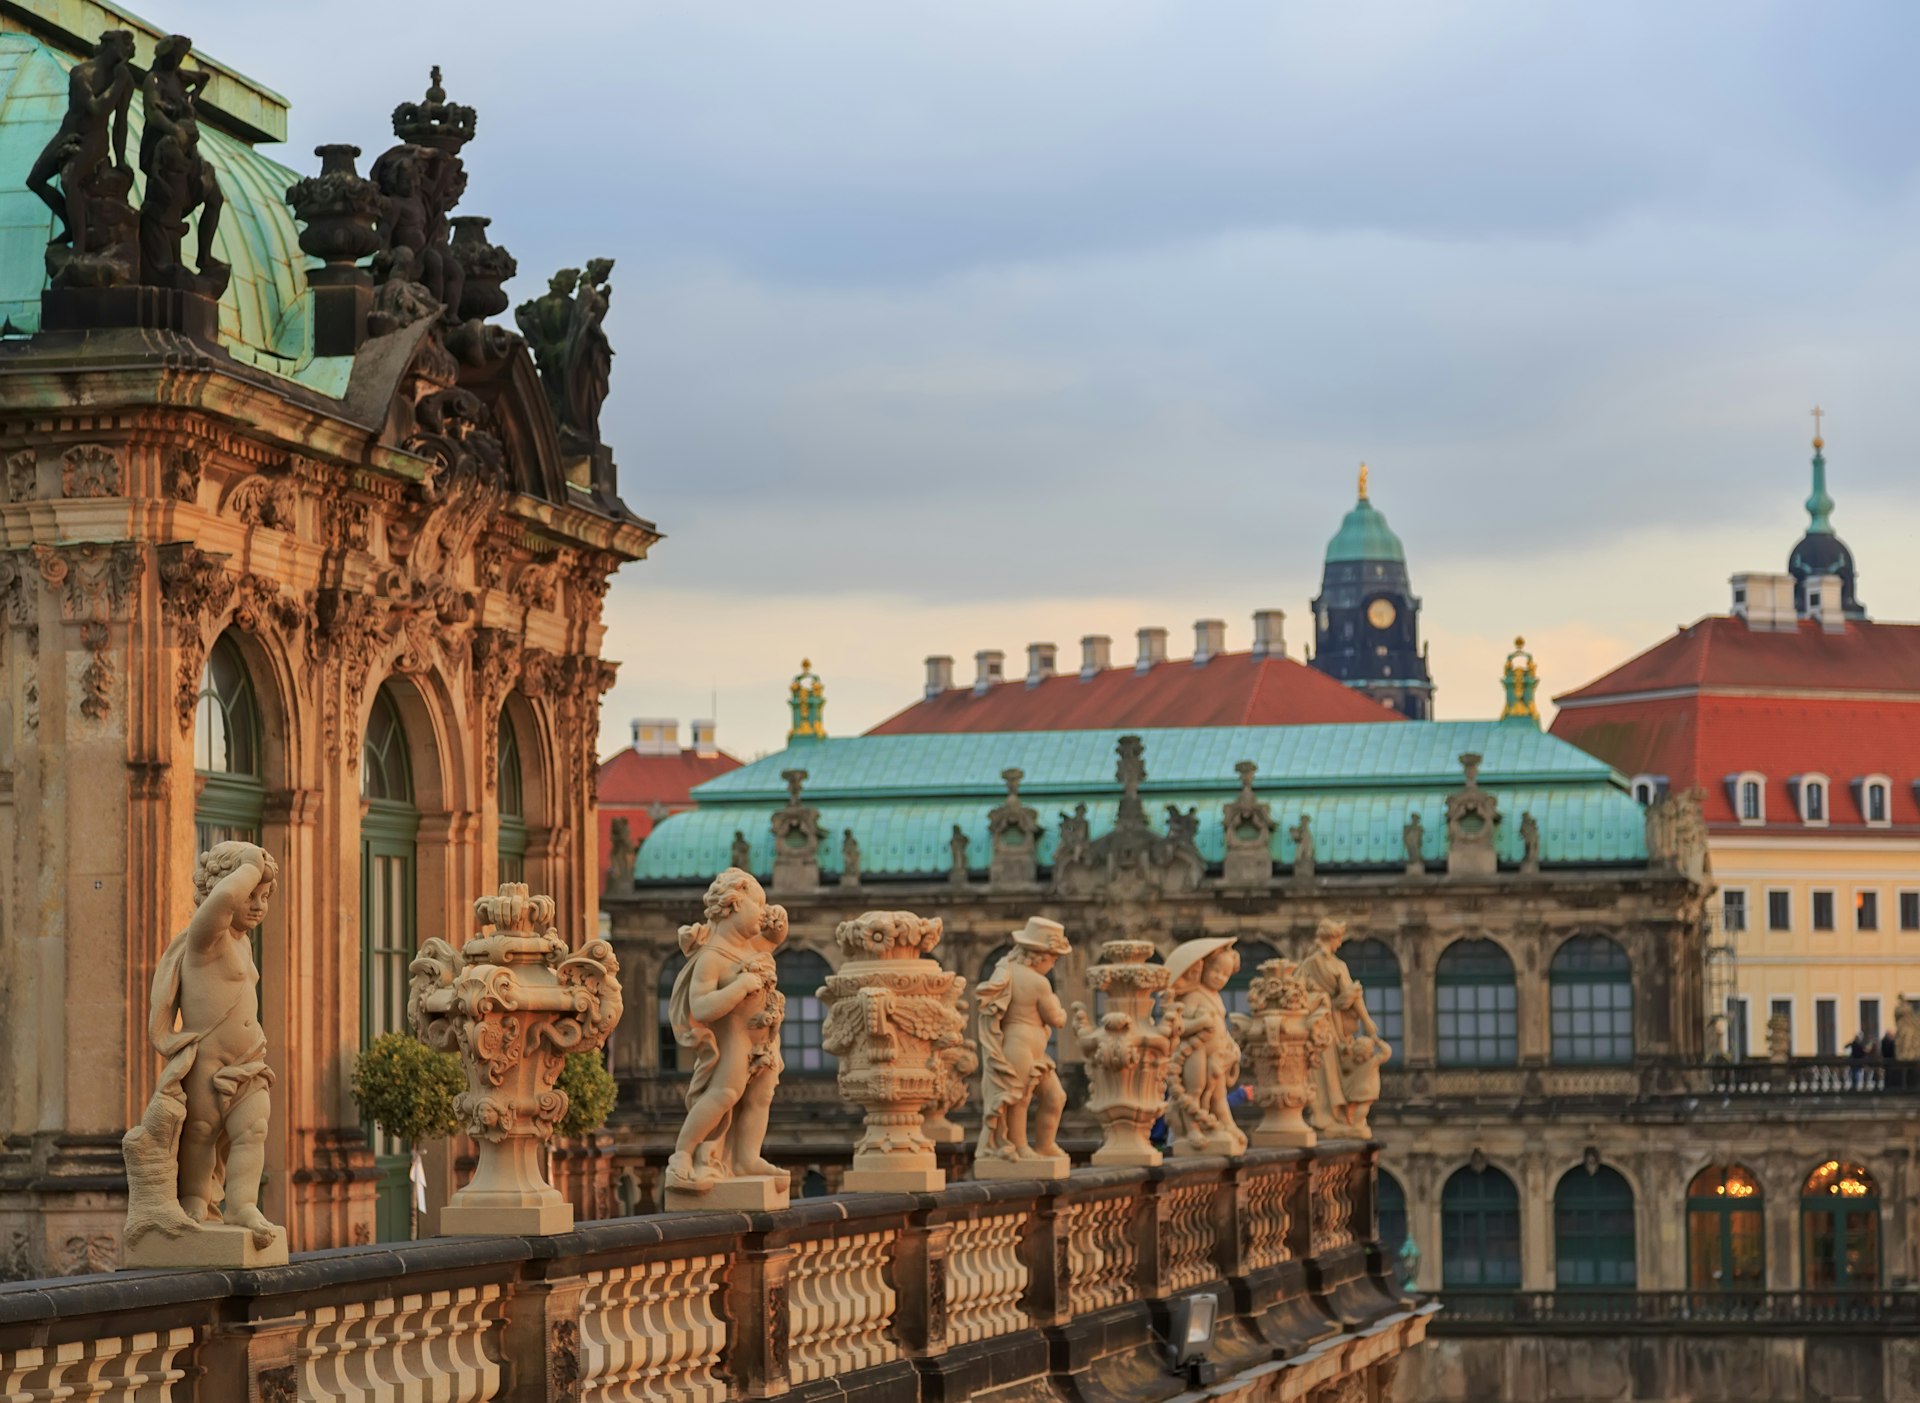 Rows of stone statues line the wall at the edge of a rooftop in Dresden